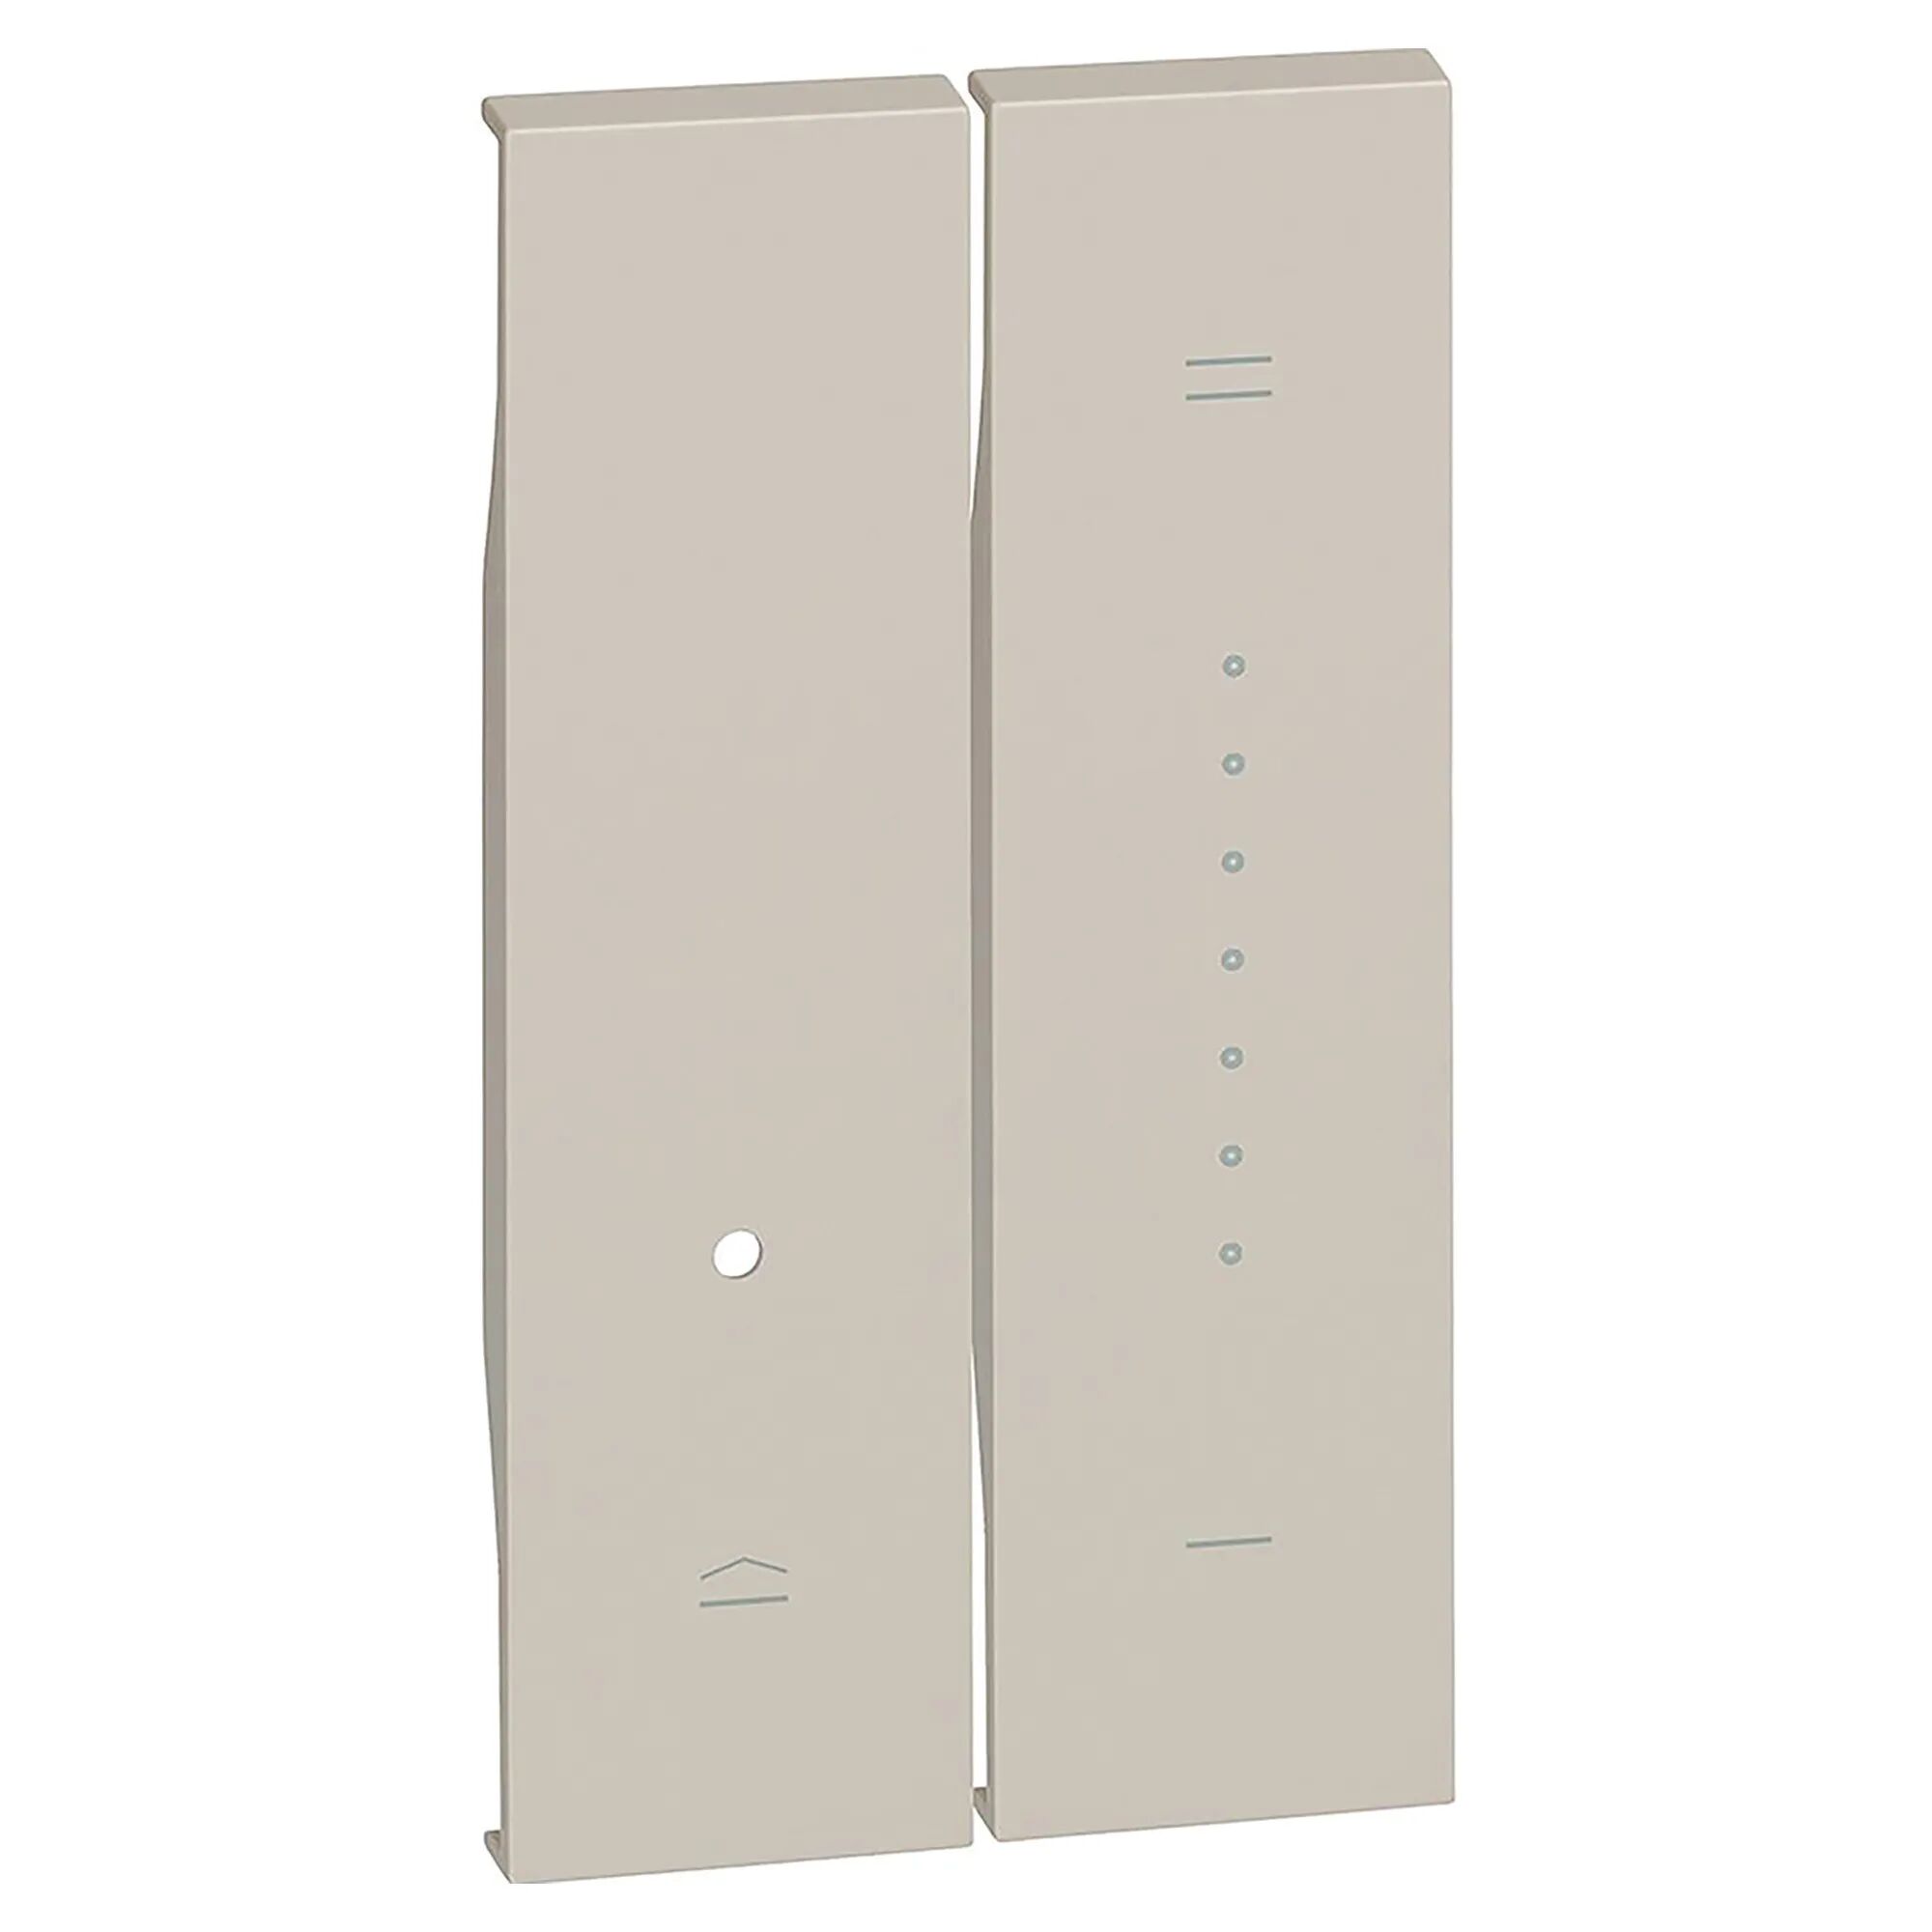 BTicino COVER DIMMER  LIVING NOW 2 MODULI COLOR SABBIA